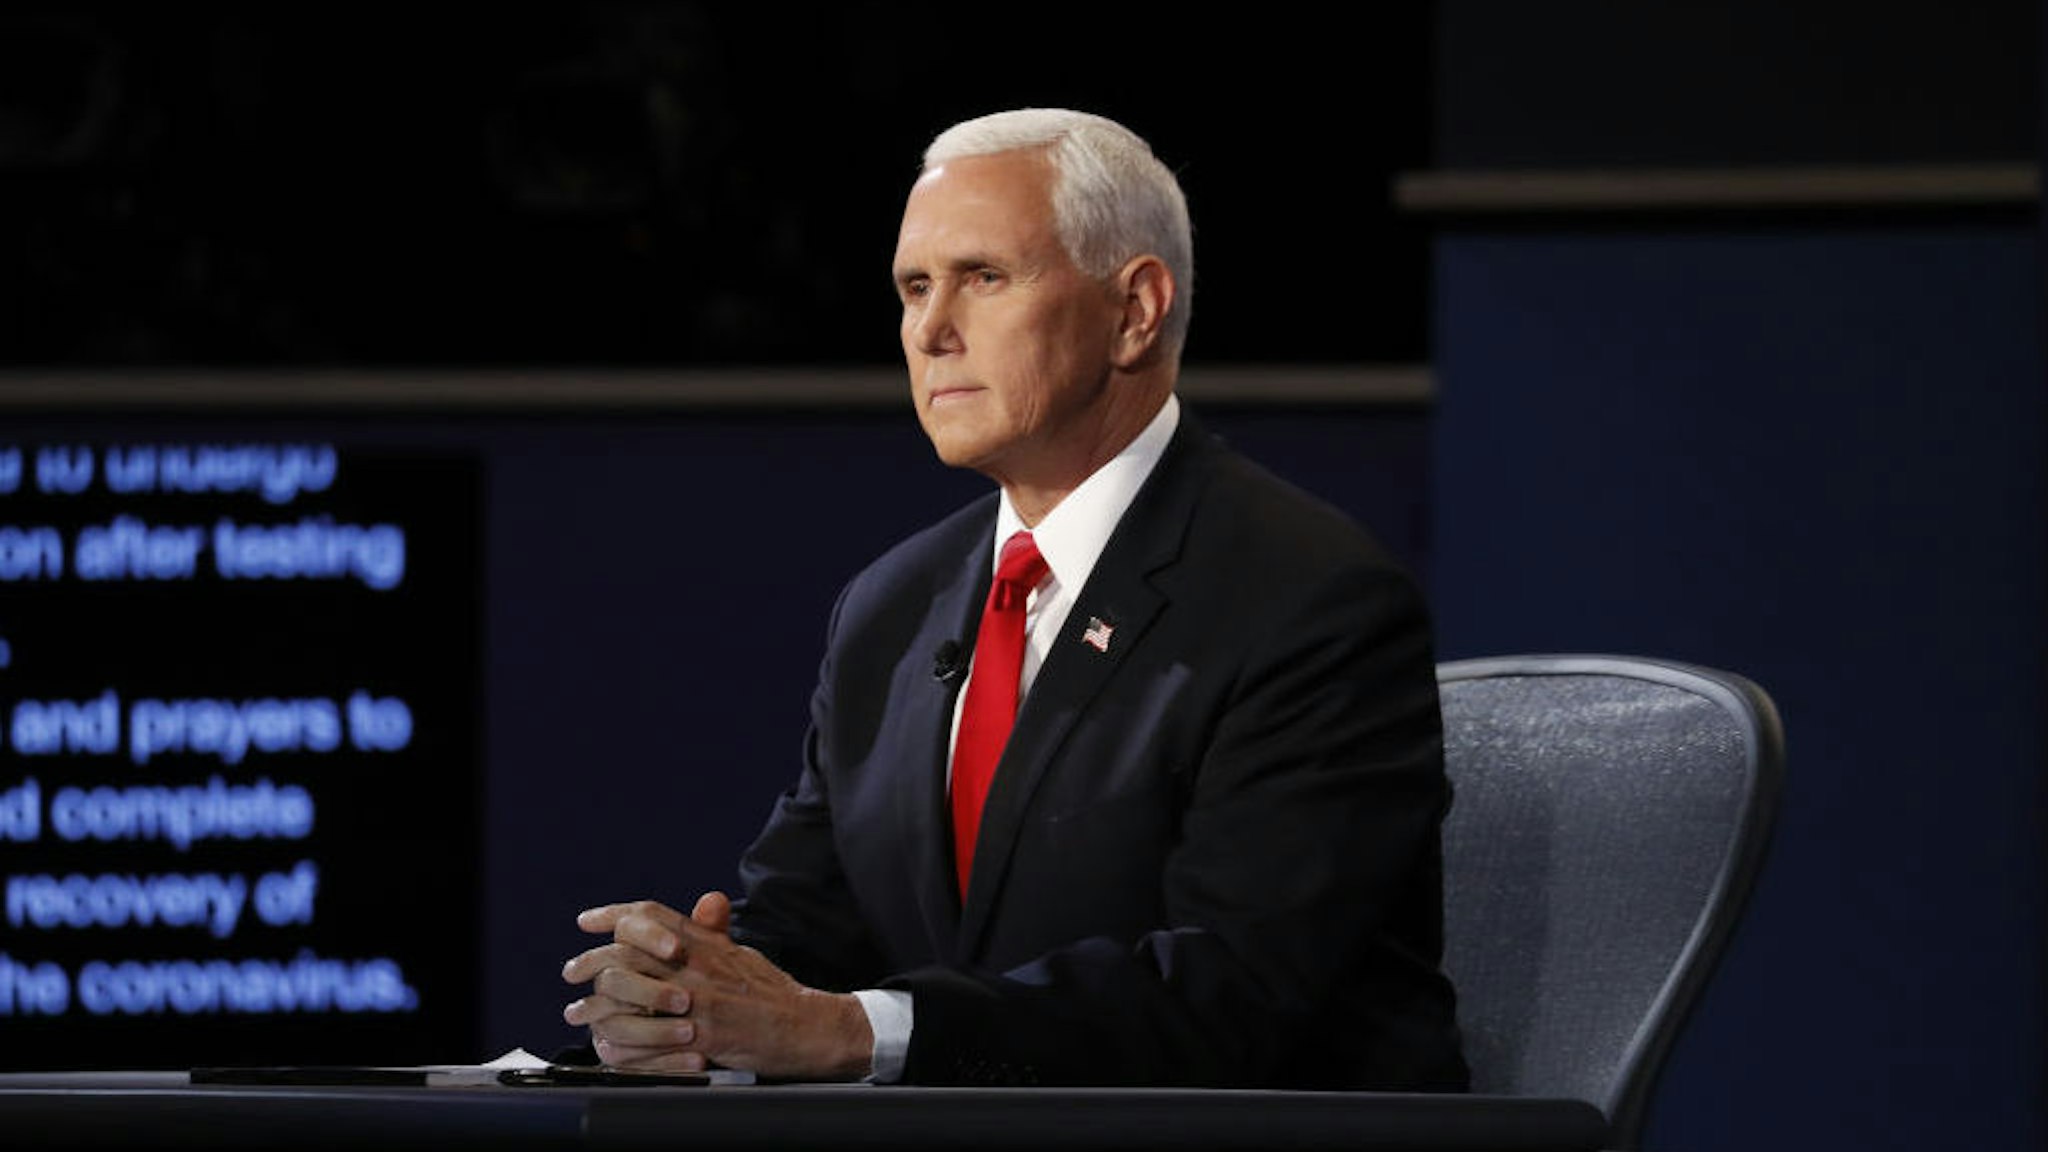 U.S. Vice President Mike Pence waits to begin the U.S. vice presidential debate at the University of Utah in Salt Lake City, Utah, U.S., on Wednesday, Oct. 7, 2020. Pence and Harris face off in their first and only debate less than a month before the election, with coronavirus adding a sudden twist to the event. Photographer: Kim Raff/Bloomberg